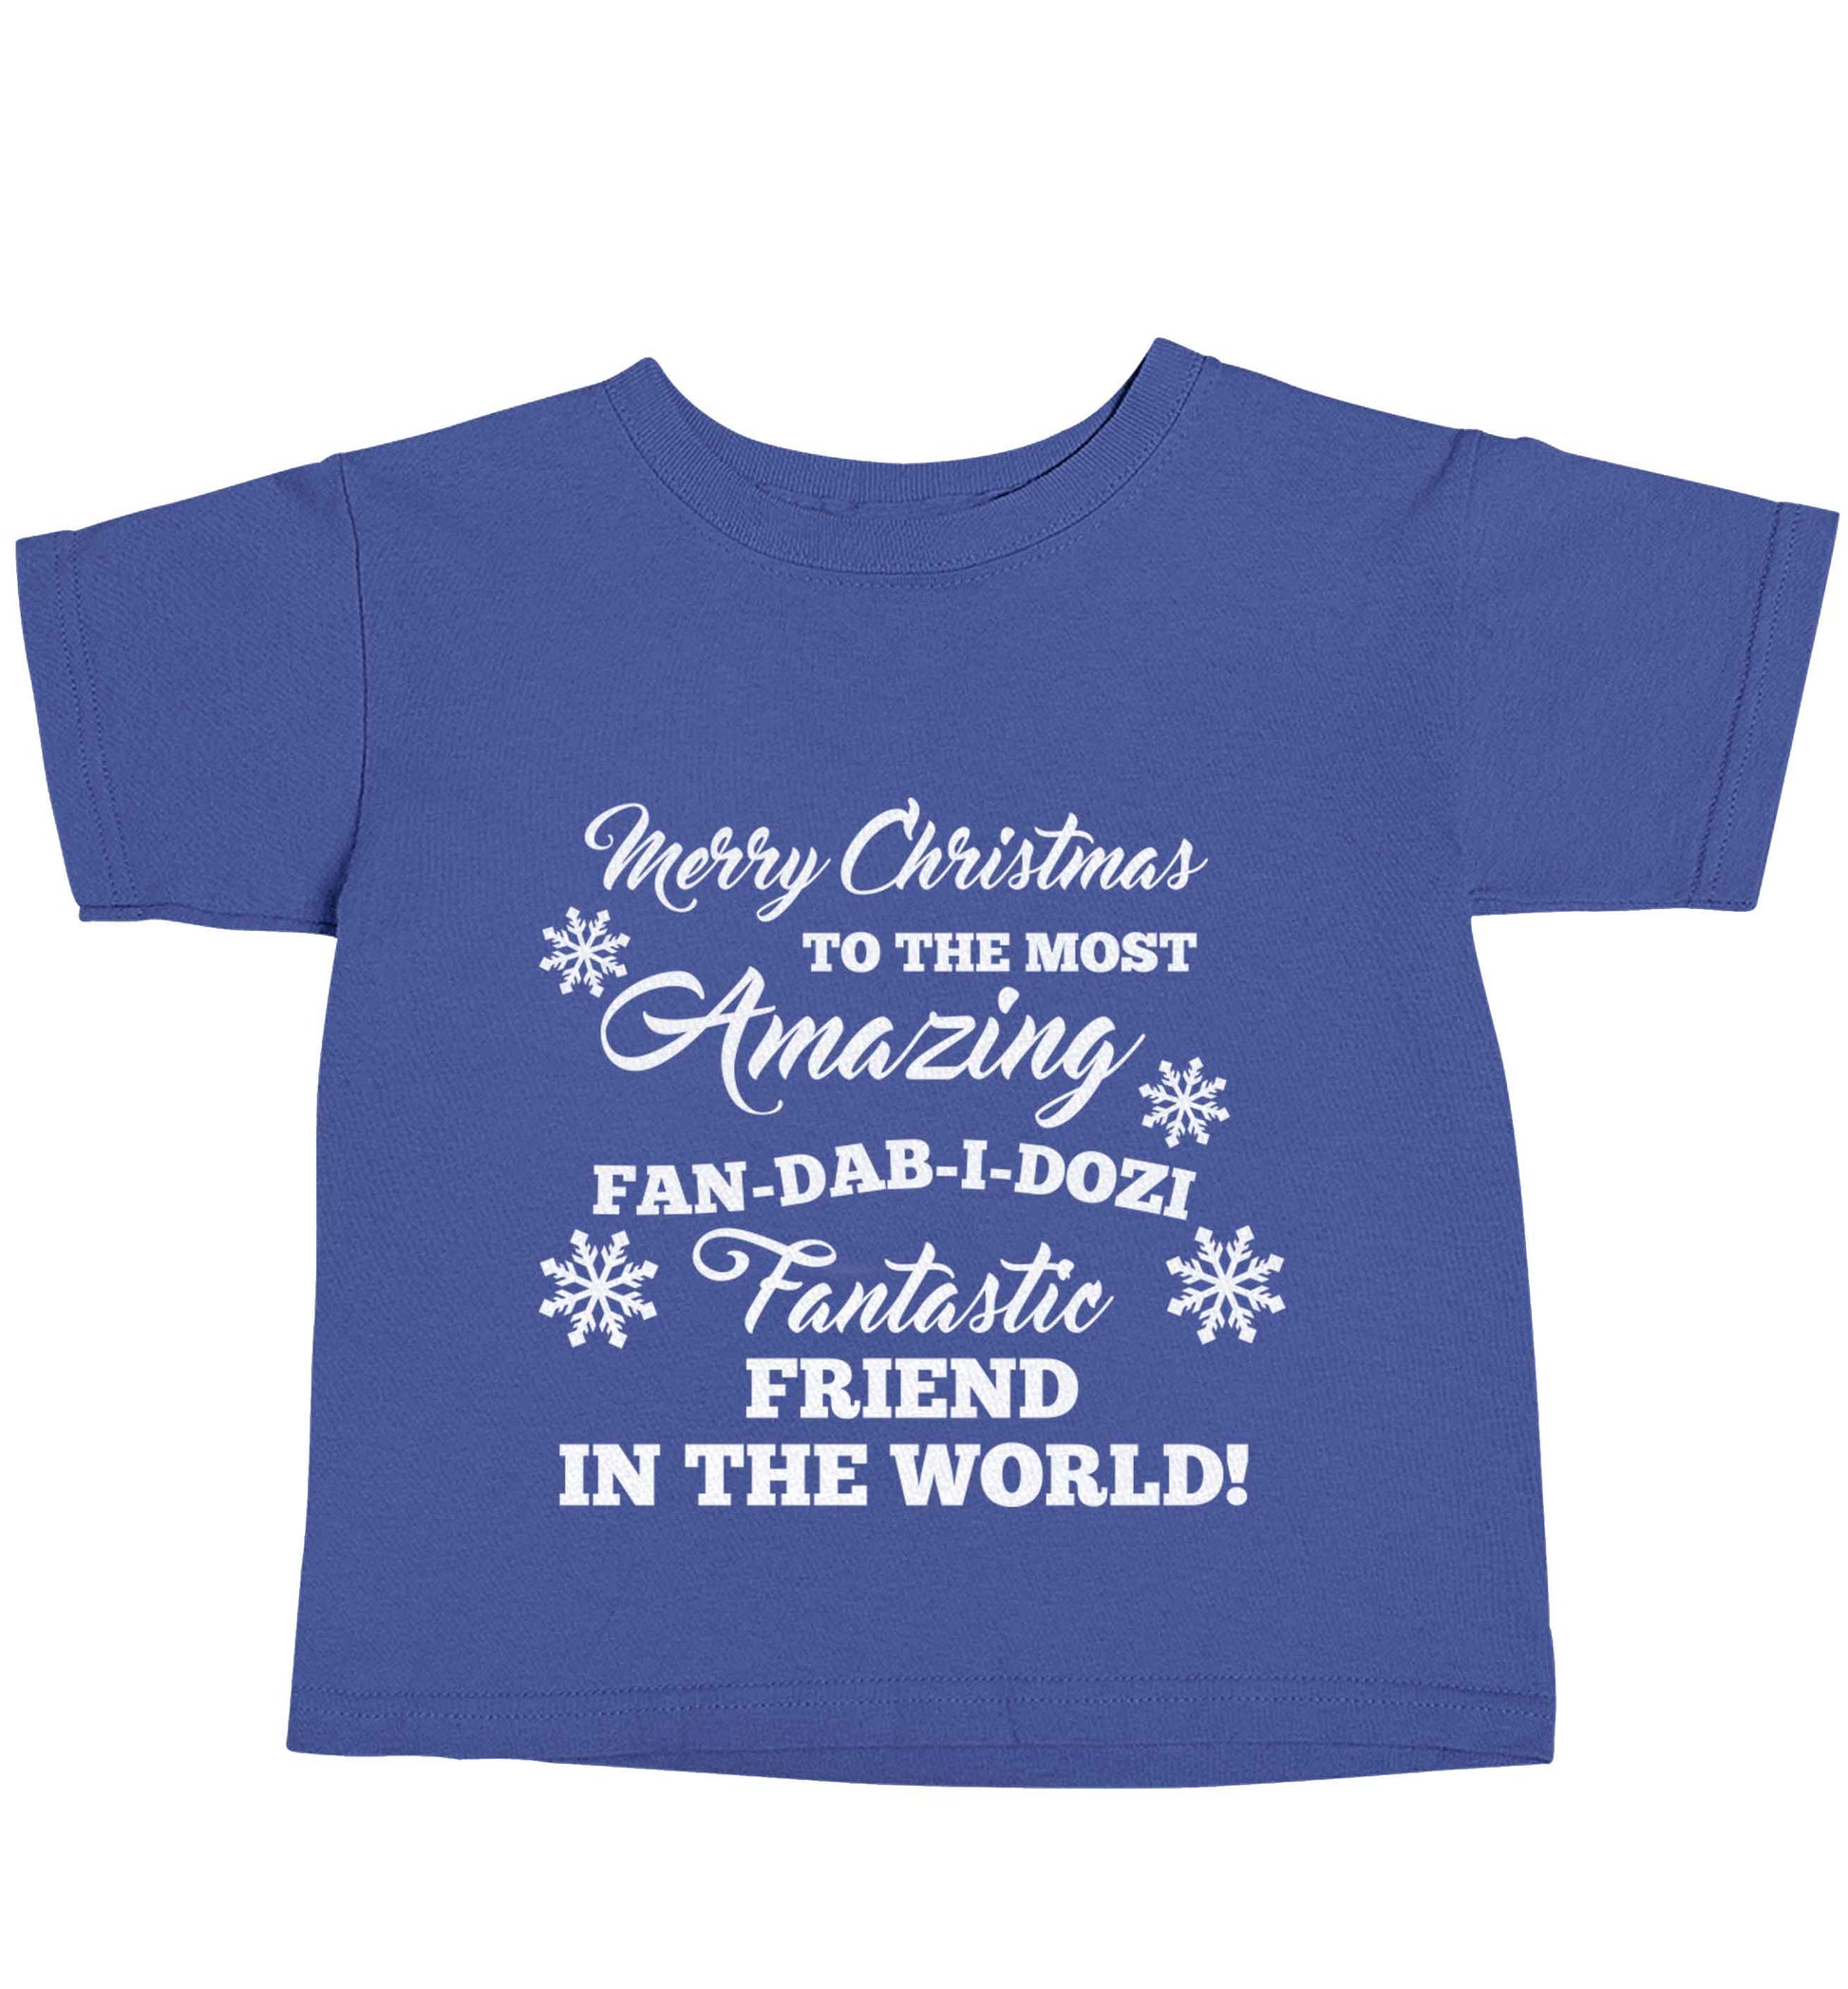 Merry Christmas to the most amazing fan-dab-i-dozi fantasic friend in the world blue baby toddler Tshirt 2 Years